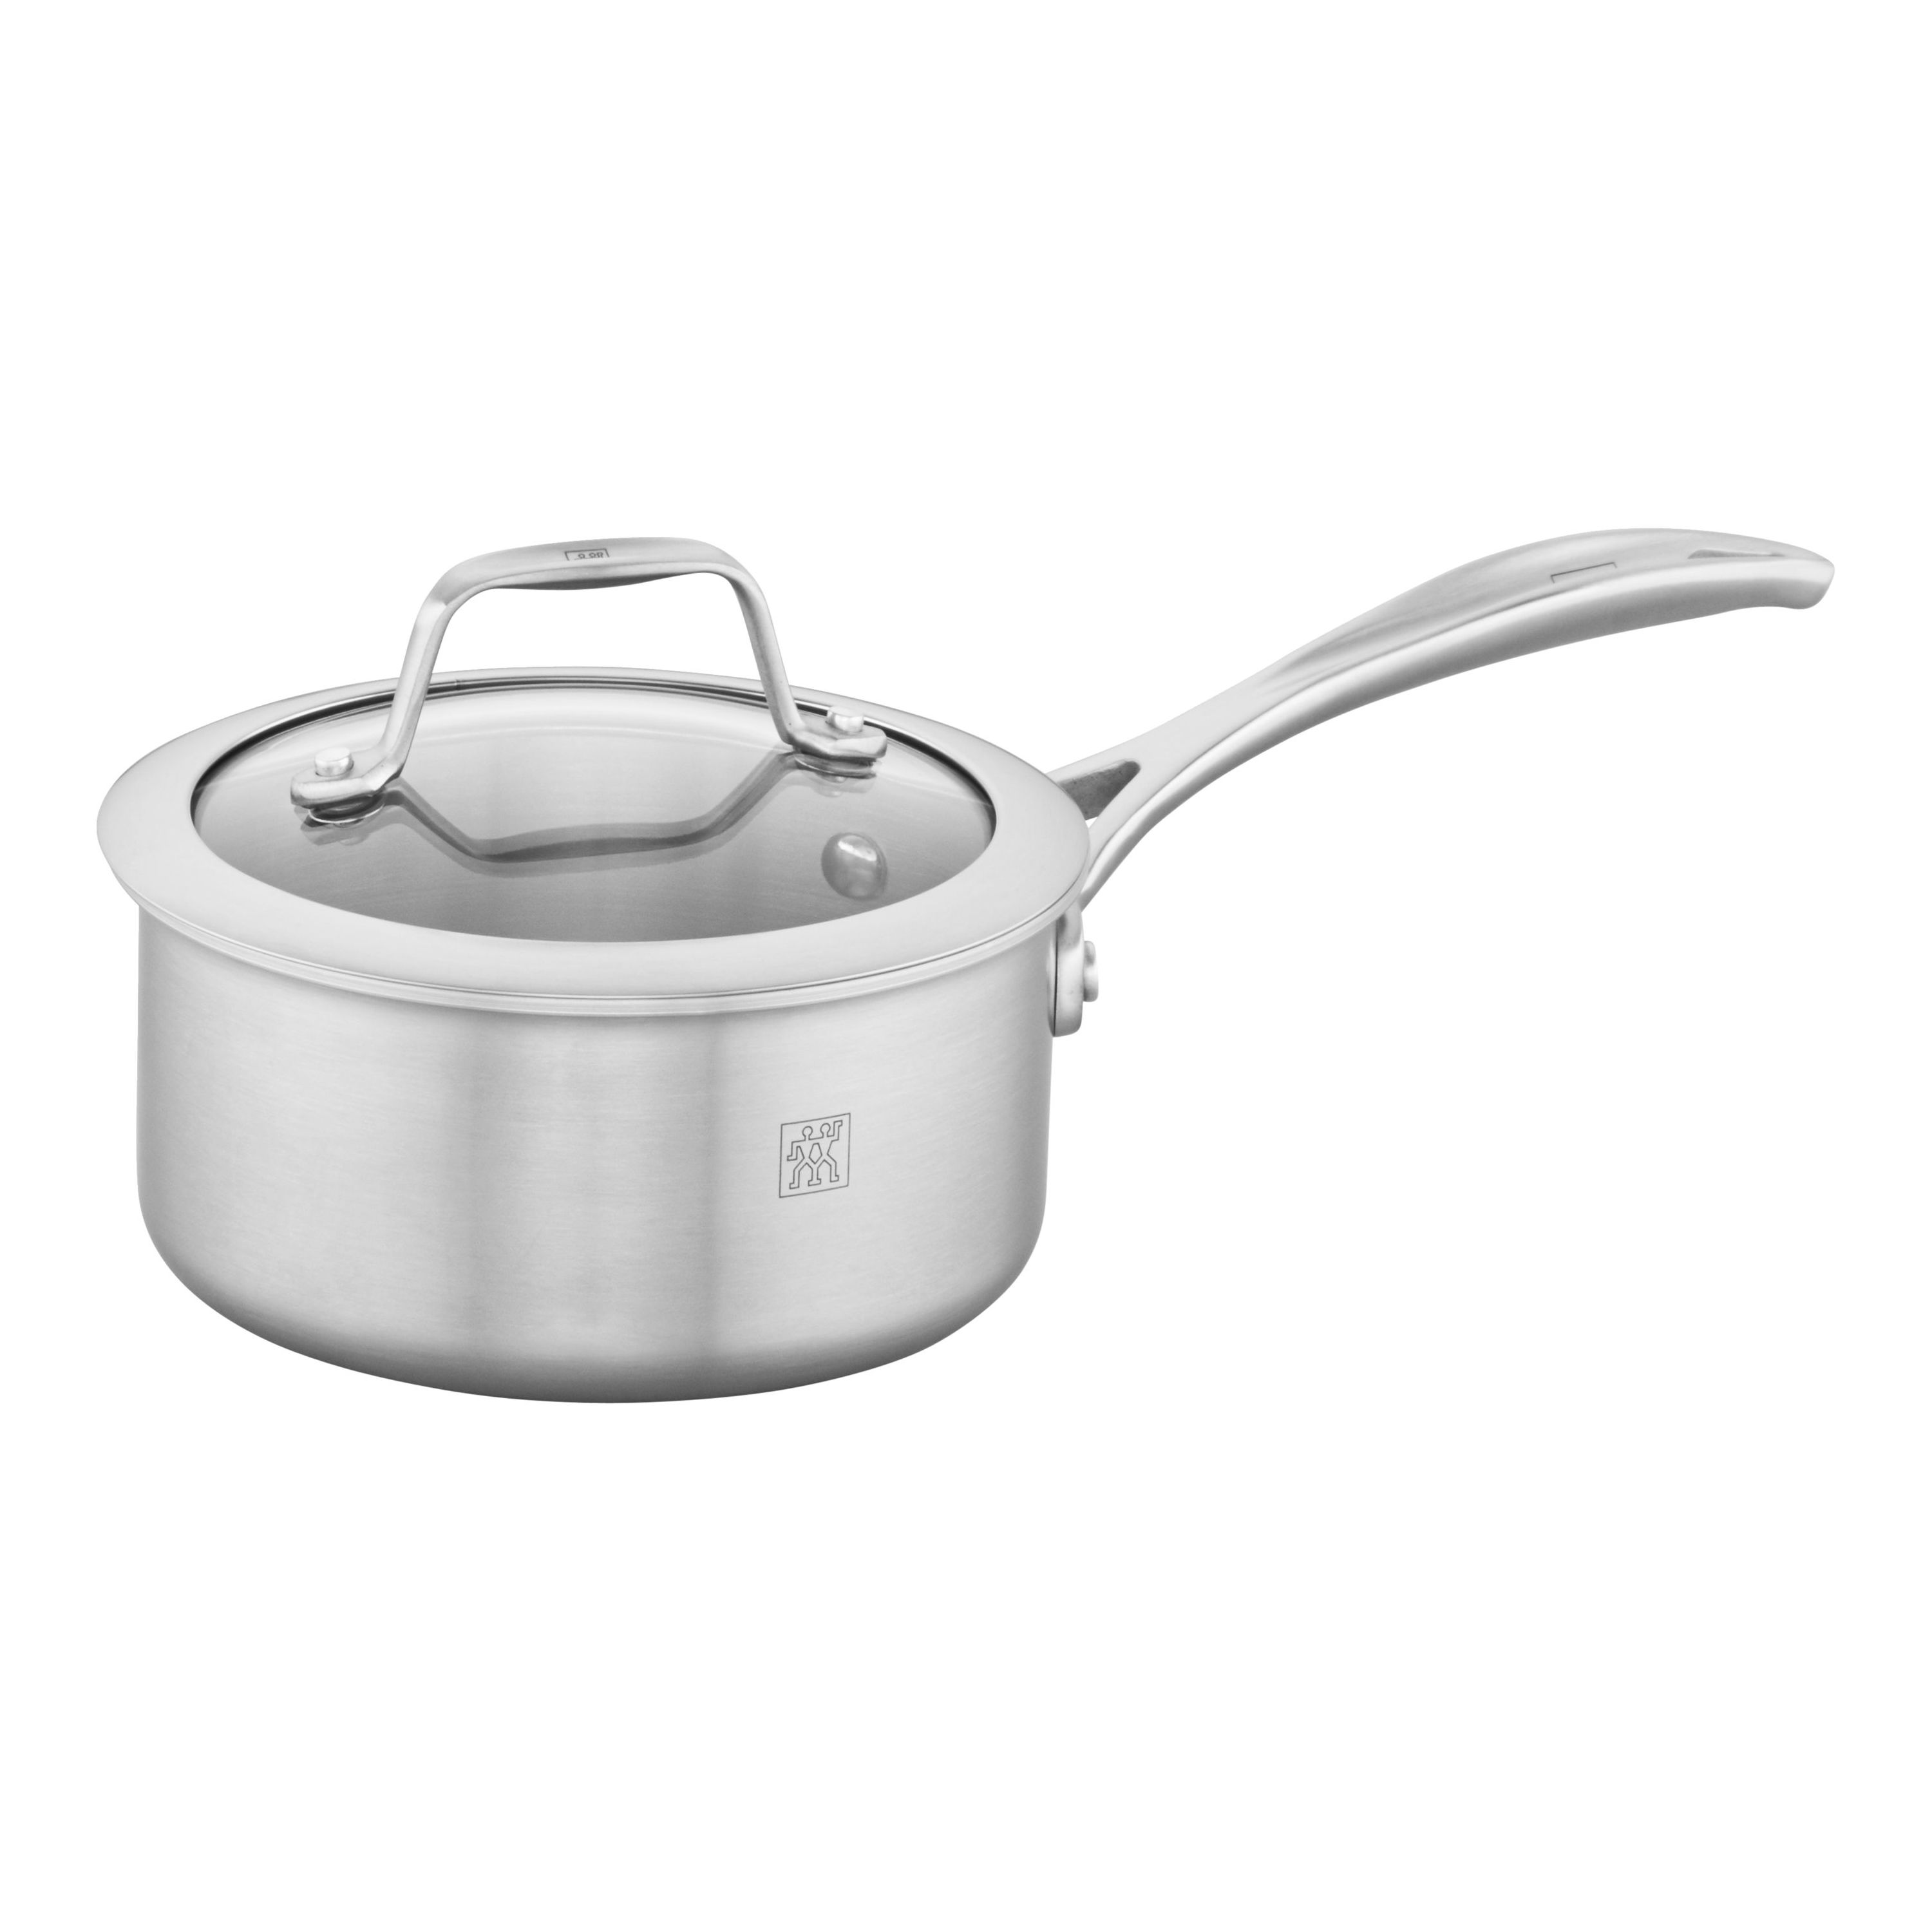 4 qt, stainless steel, Sauce pan